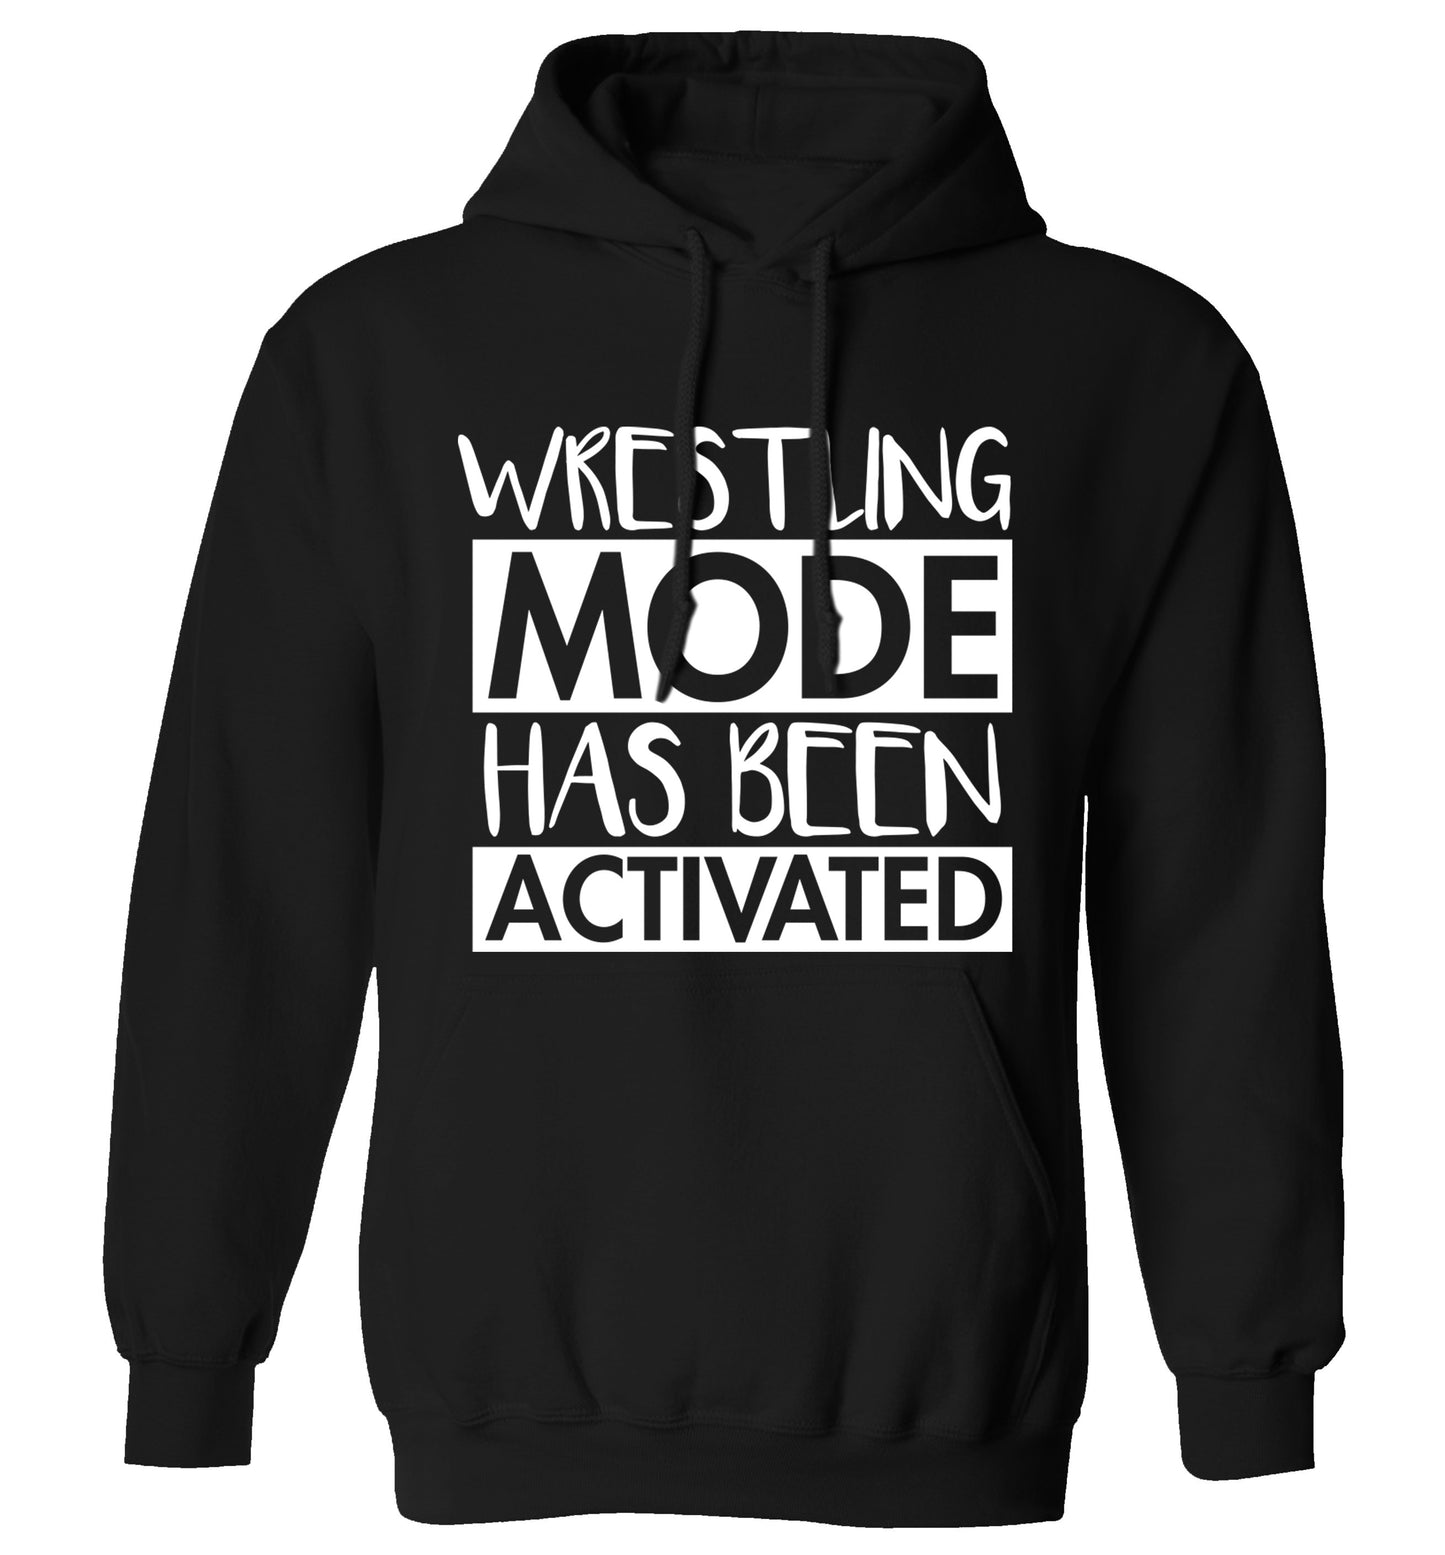 Wresting mode activated adults unisex black hoodie 2XL